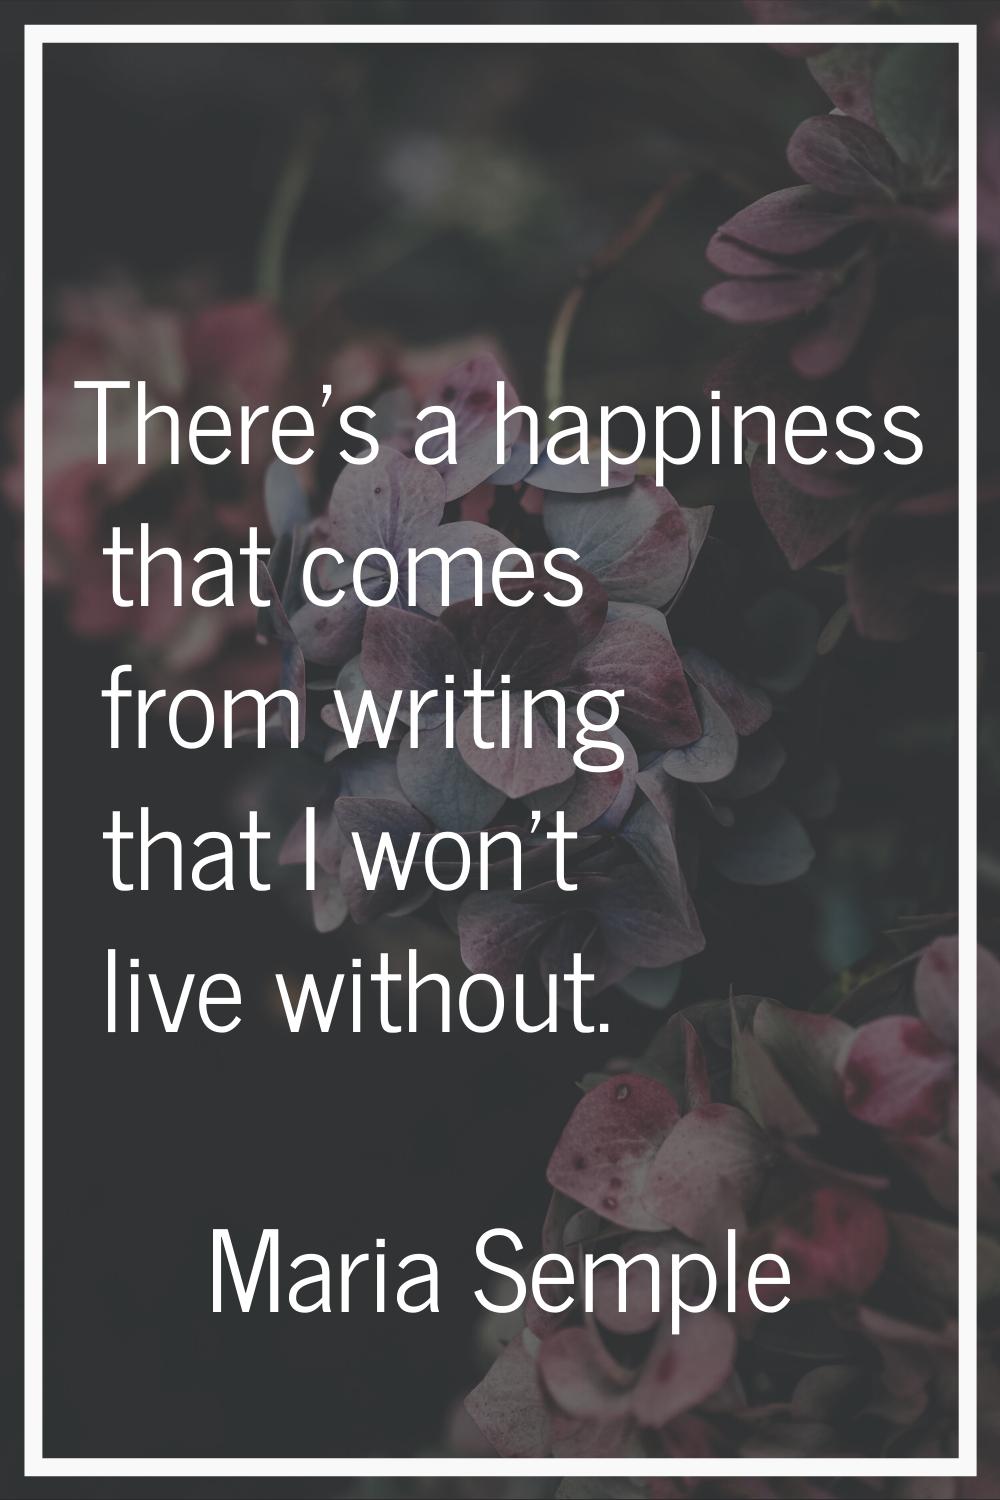 There's a happiness that comes from writing that I won't live without.